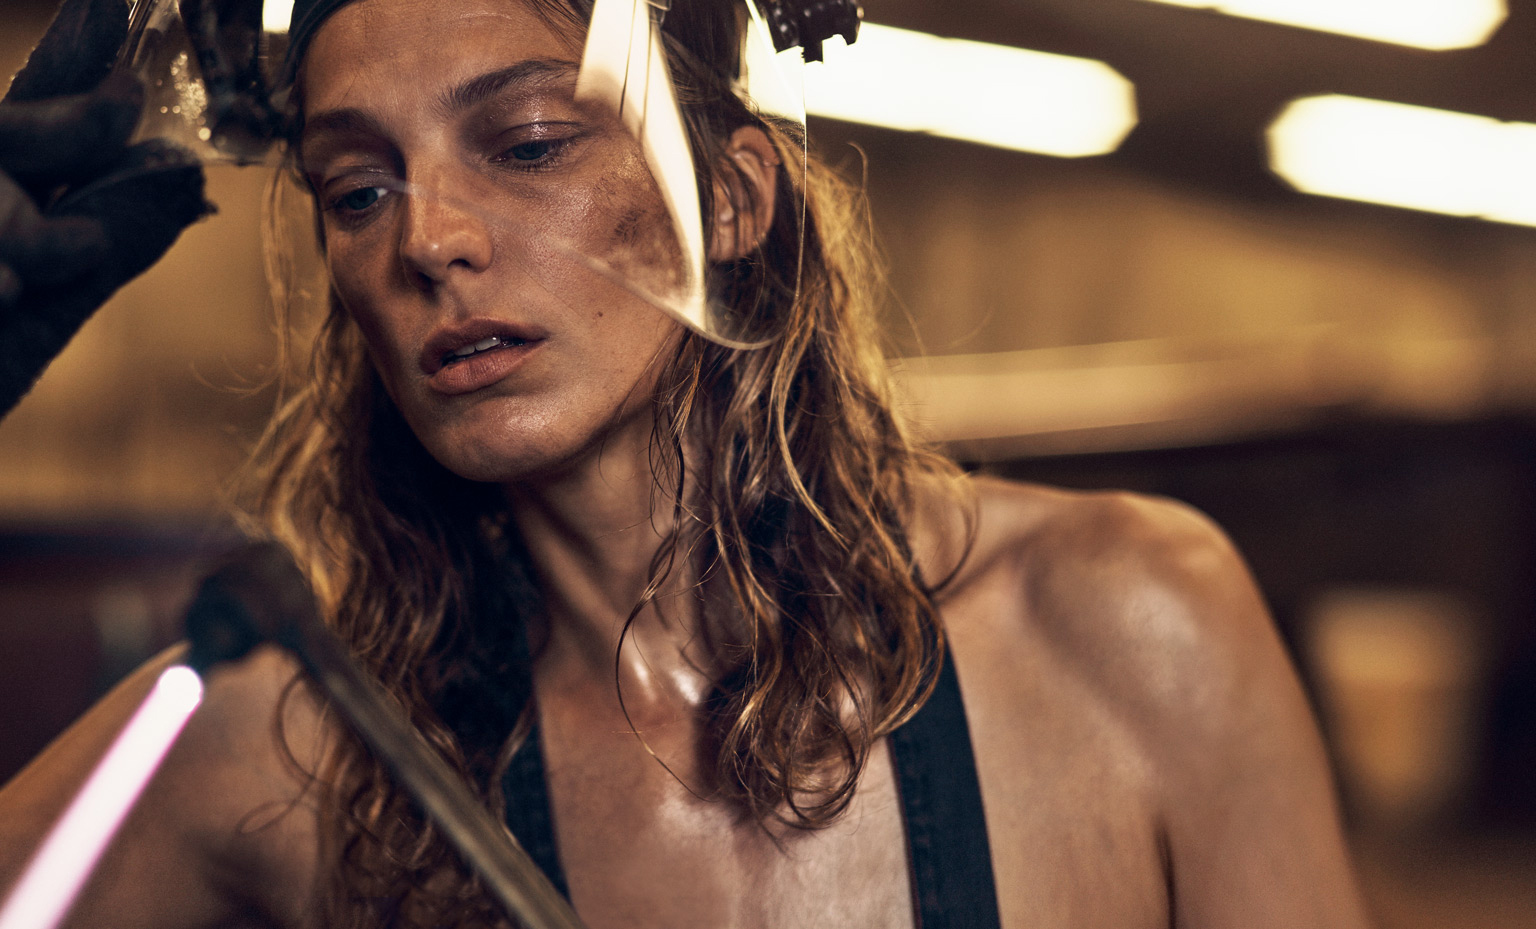 daria-werbowy-by-mikael-jansson-for-porter-magazine-10-fall-2015-4.jpg